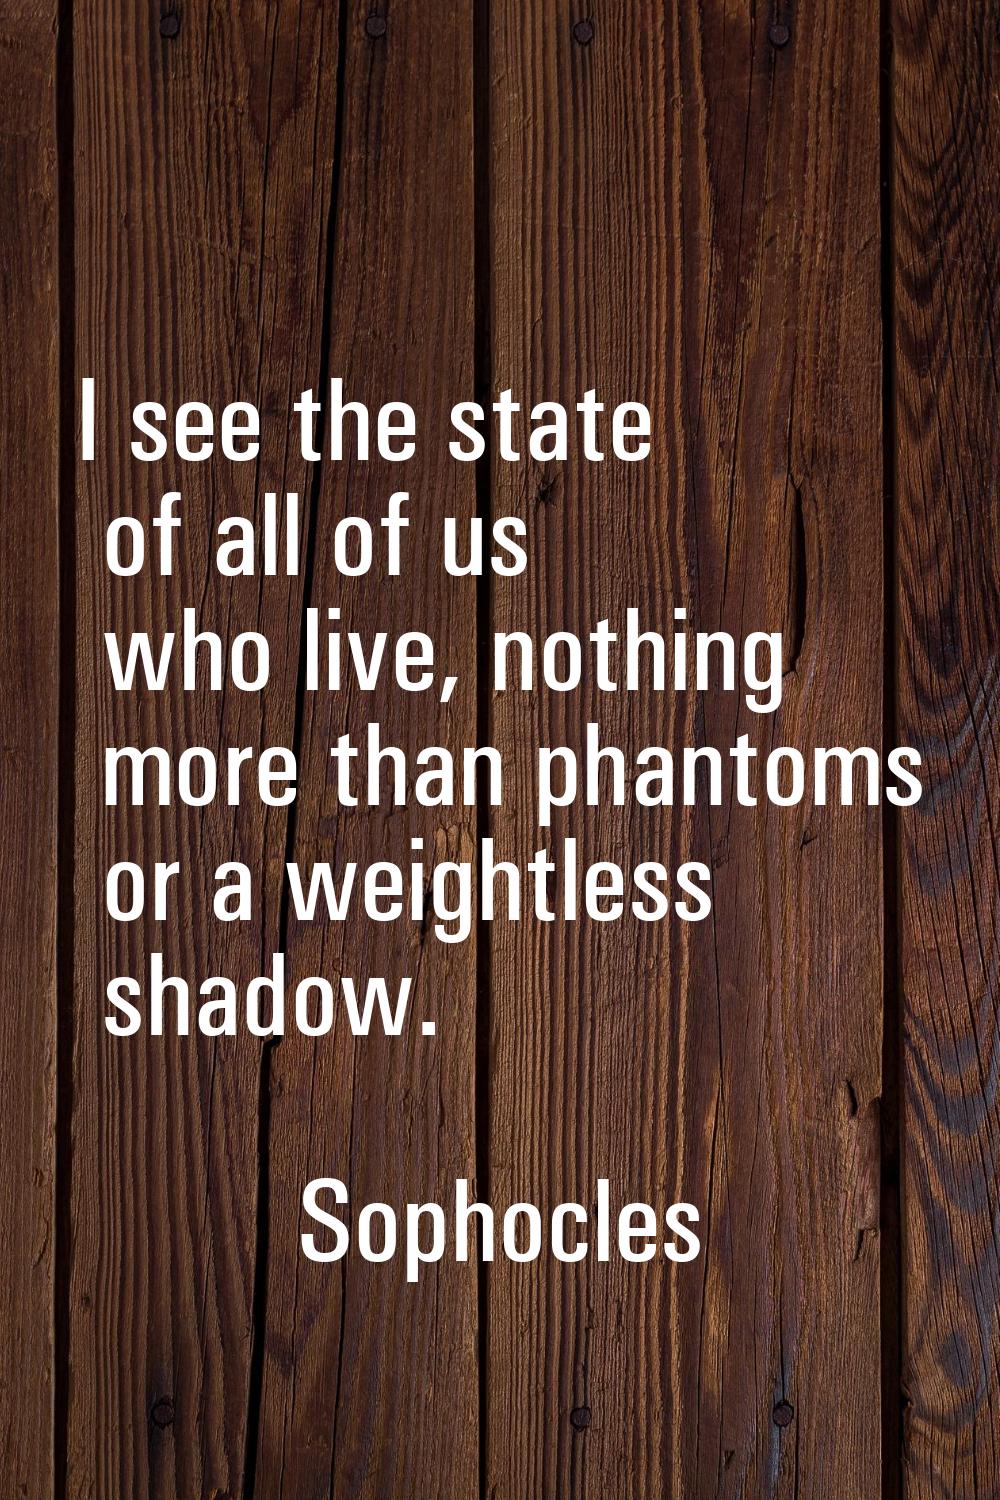 I see the state of all of us who live, nothing more than phantoms or a weightless shadow.